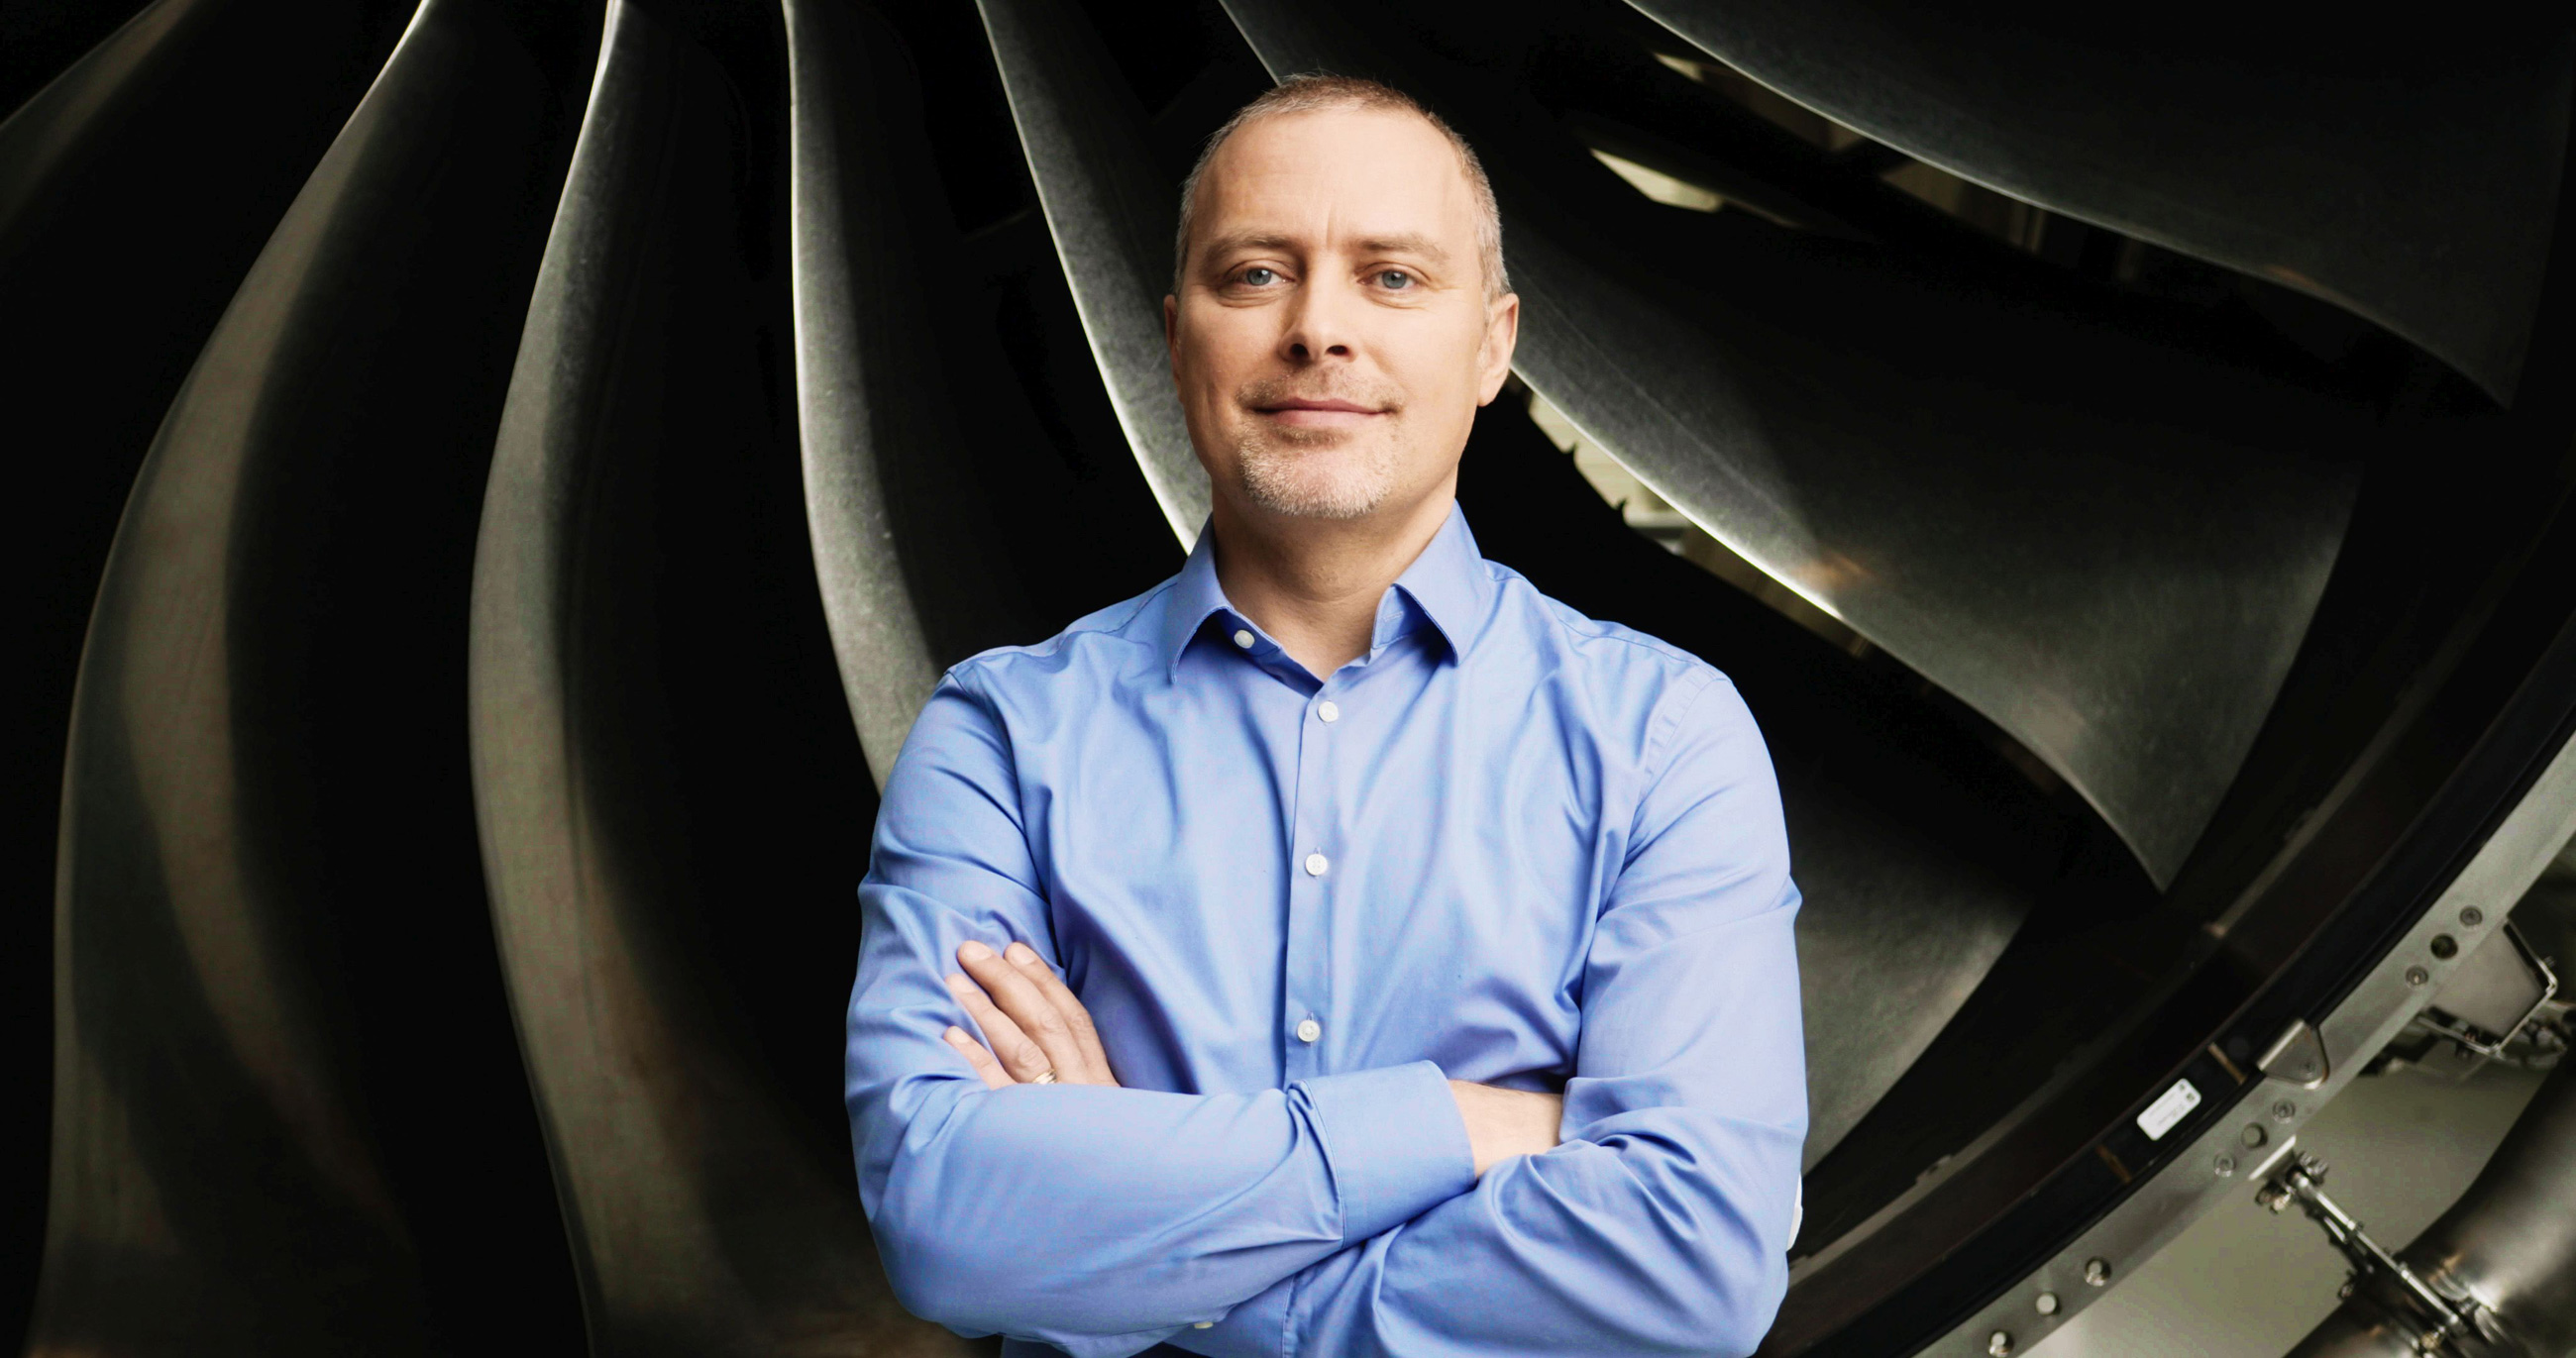 The research project was developed in close cooperation with the engine specialist Rolls-Royce. For his scientific achievement Dr. Dan Roth-Fagaraseanu of industrial partner Rolls-Royce was also awarded the Joseph von Fraunhofer Prize.